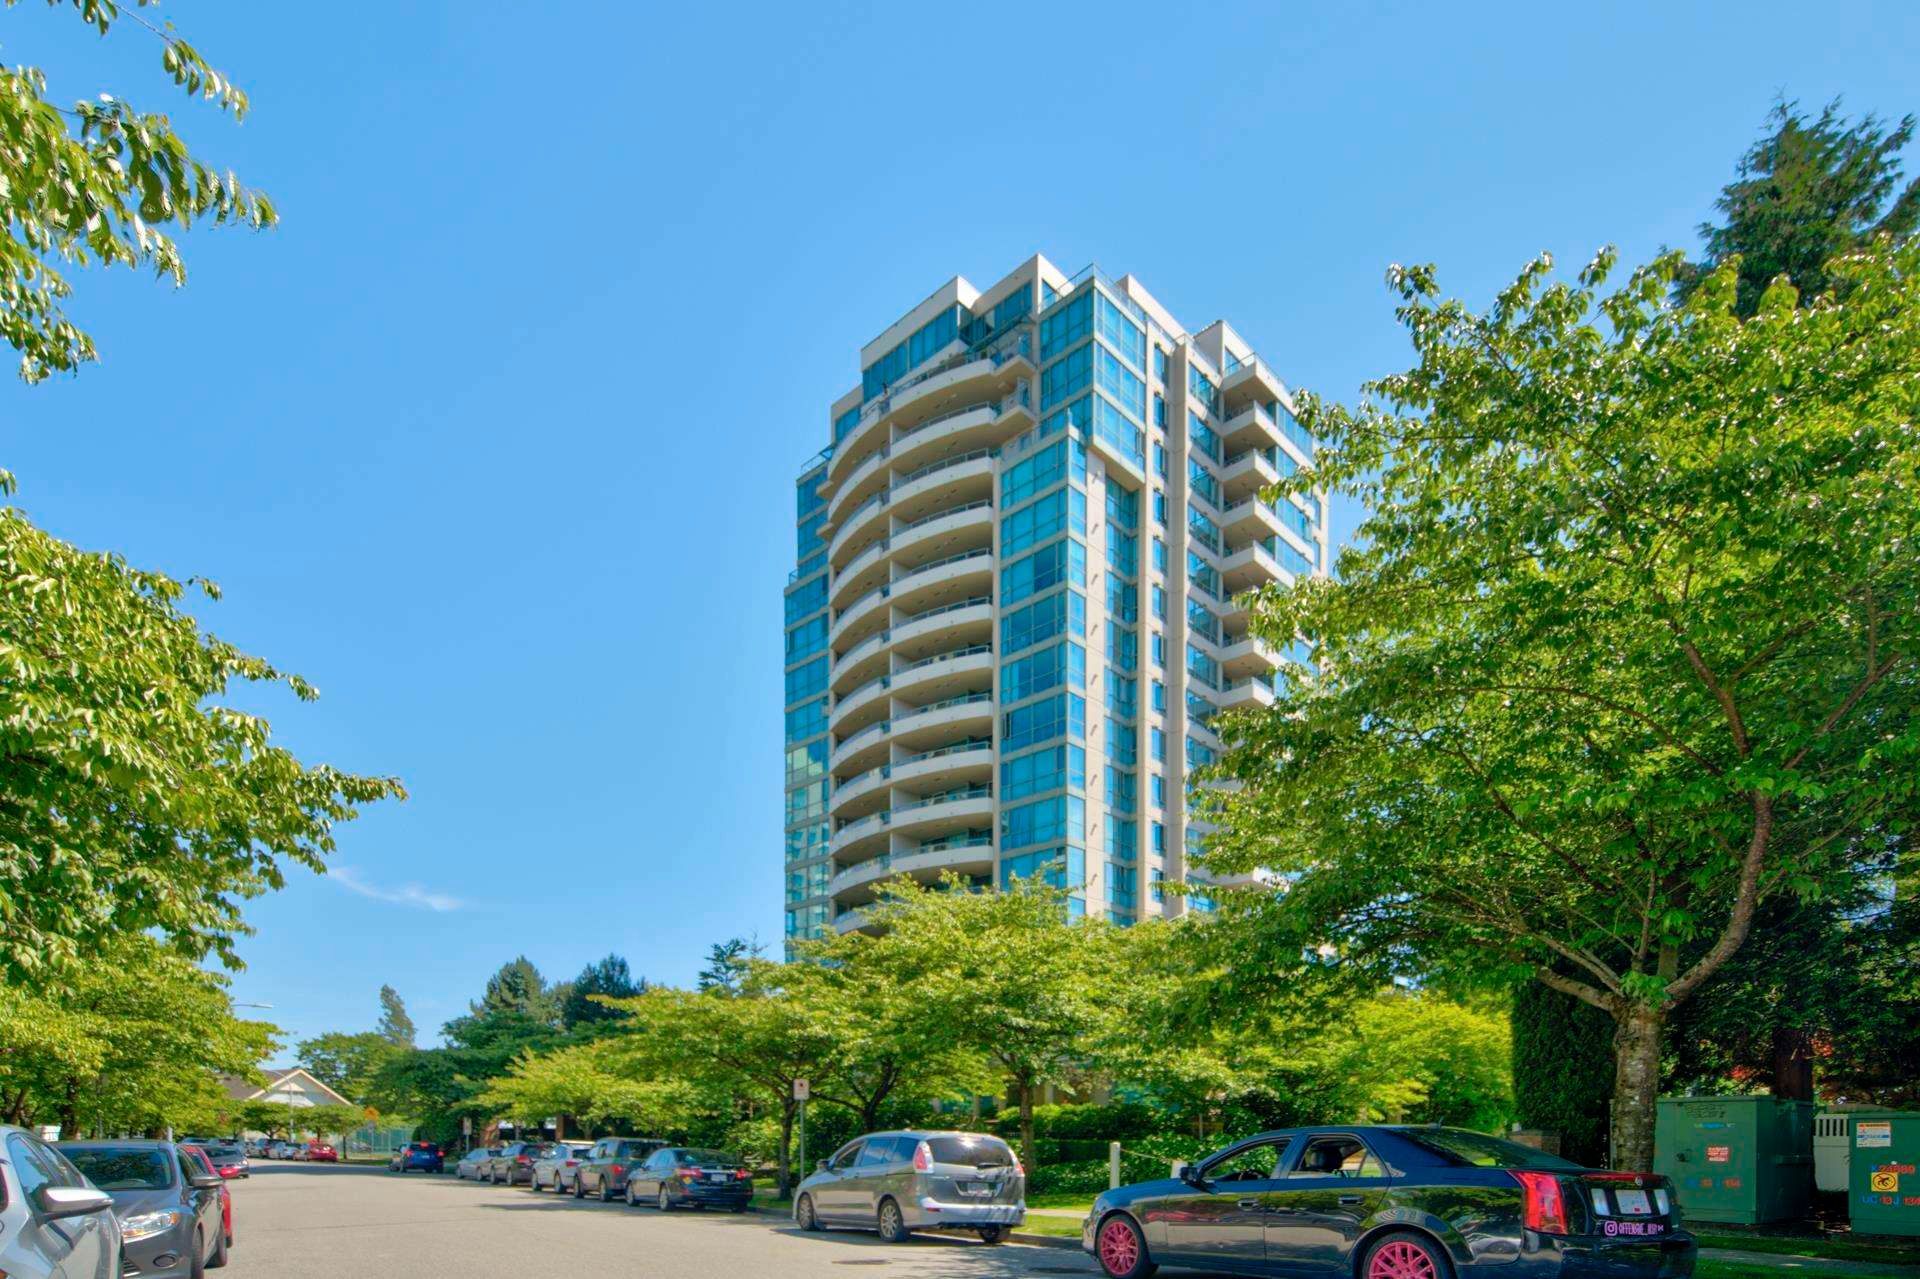 Main Photo: 1601 6622 SOUTHOAKS CRESCENT in Burnaby: Highgate Condo for sale (Burnaby South)  : MLS®# R2596768